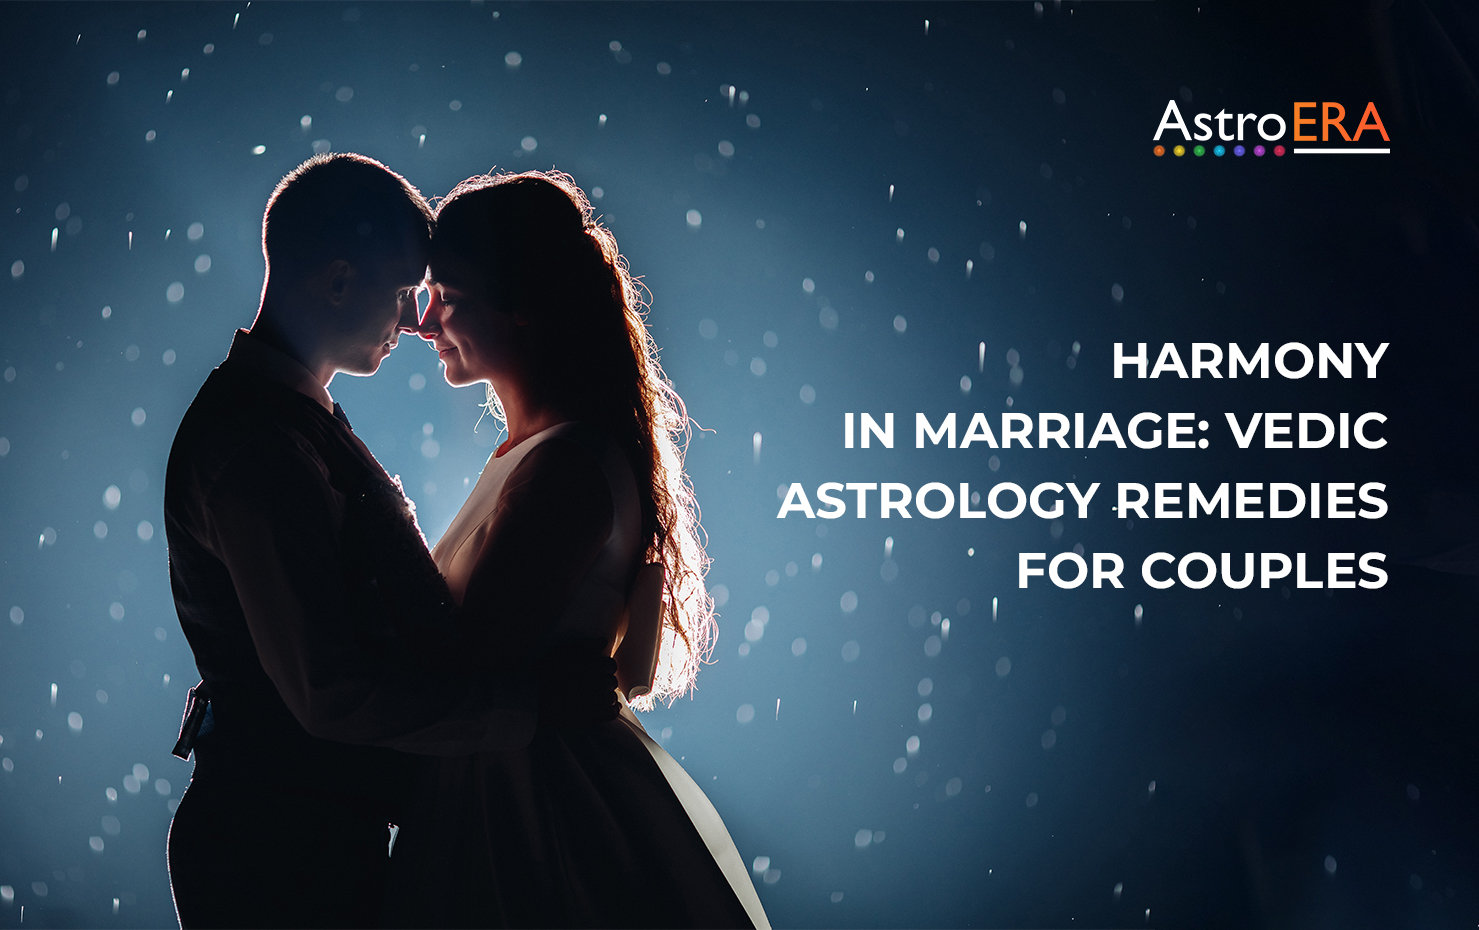 Harmony in Marriage: Vedic Astrology Remedies for Couples